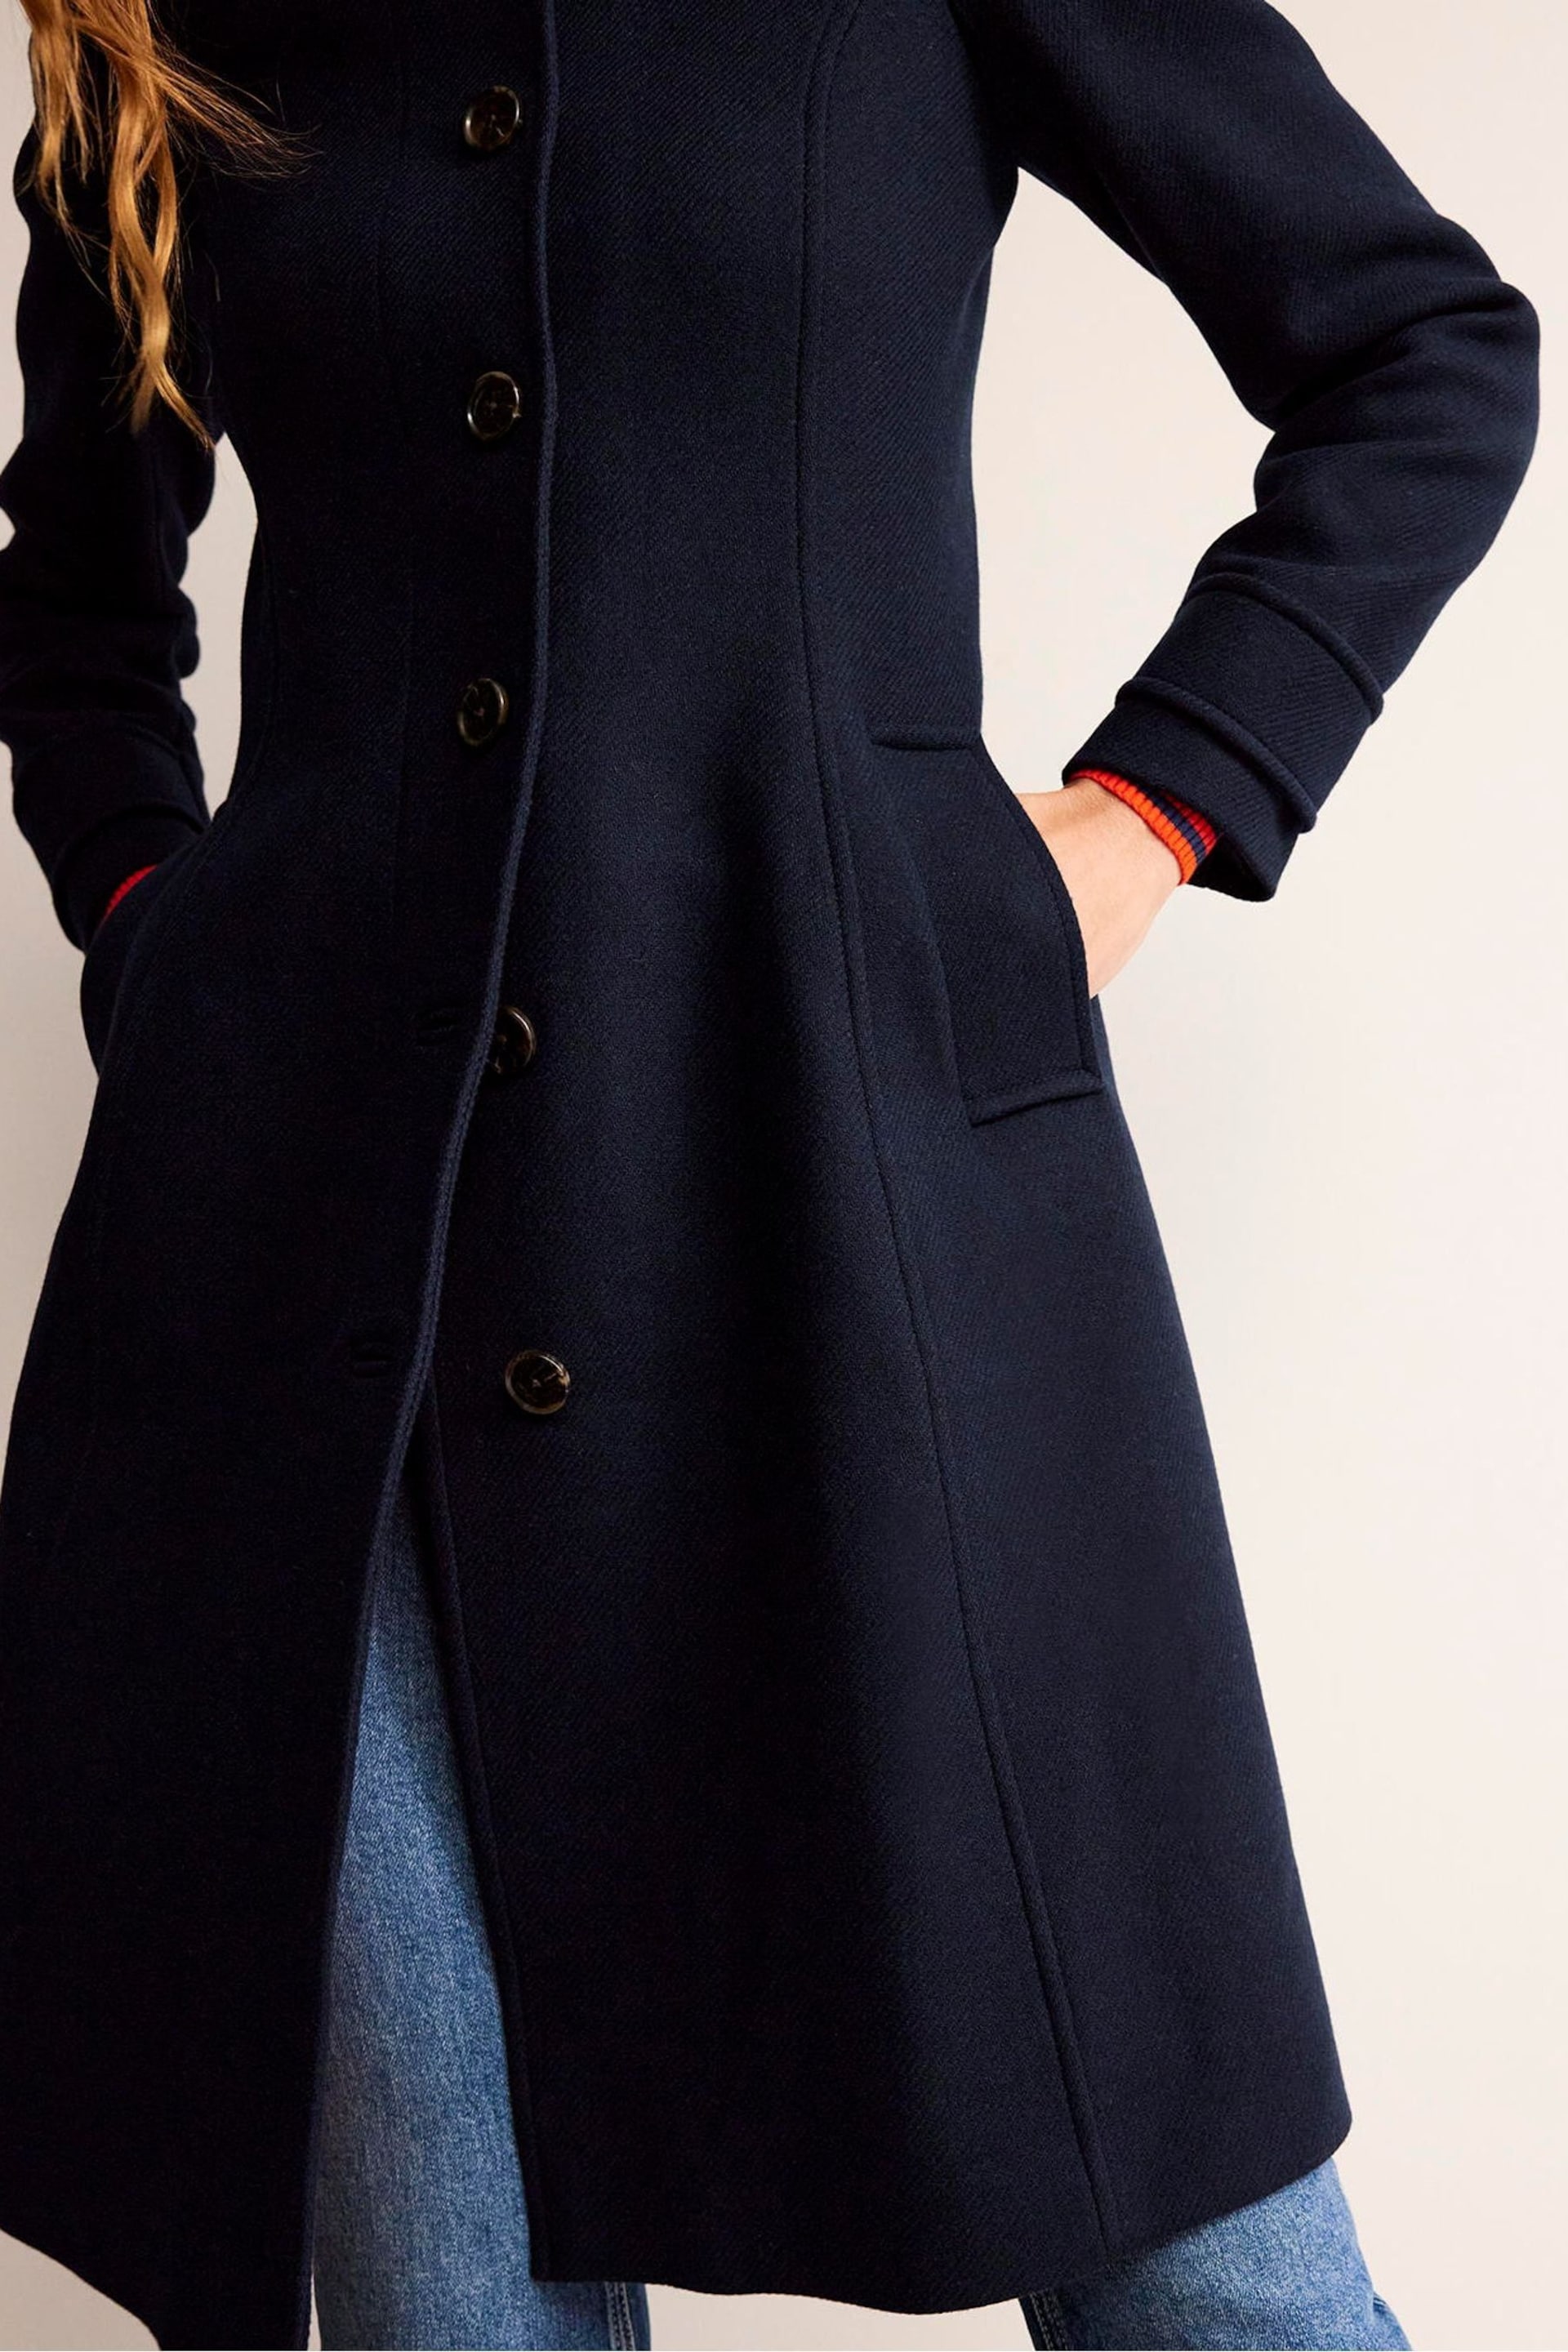 Boden Blue Durham Wool Collared Coat - Image 4 of 5